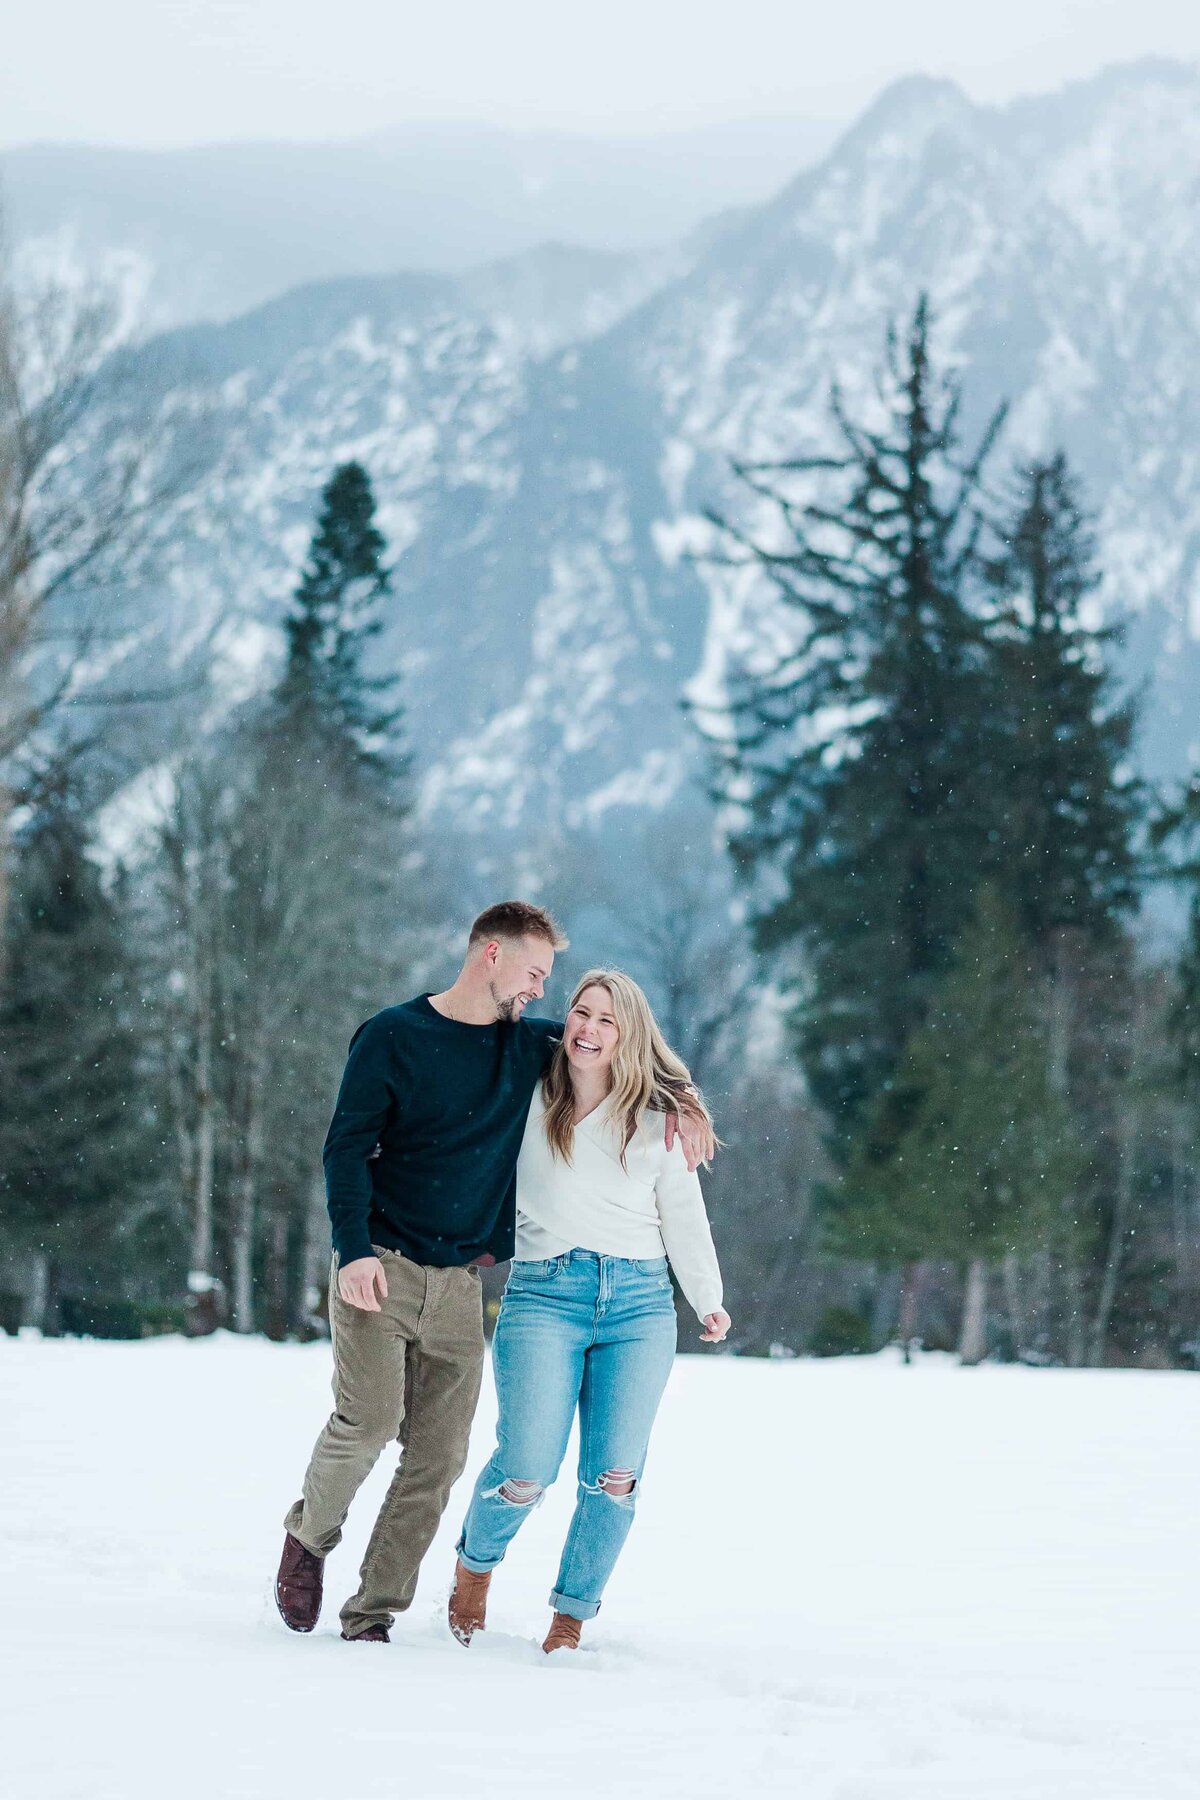 Snowy-Engagement-Meadowbrook-Farm-Northbend-WA-1615